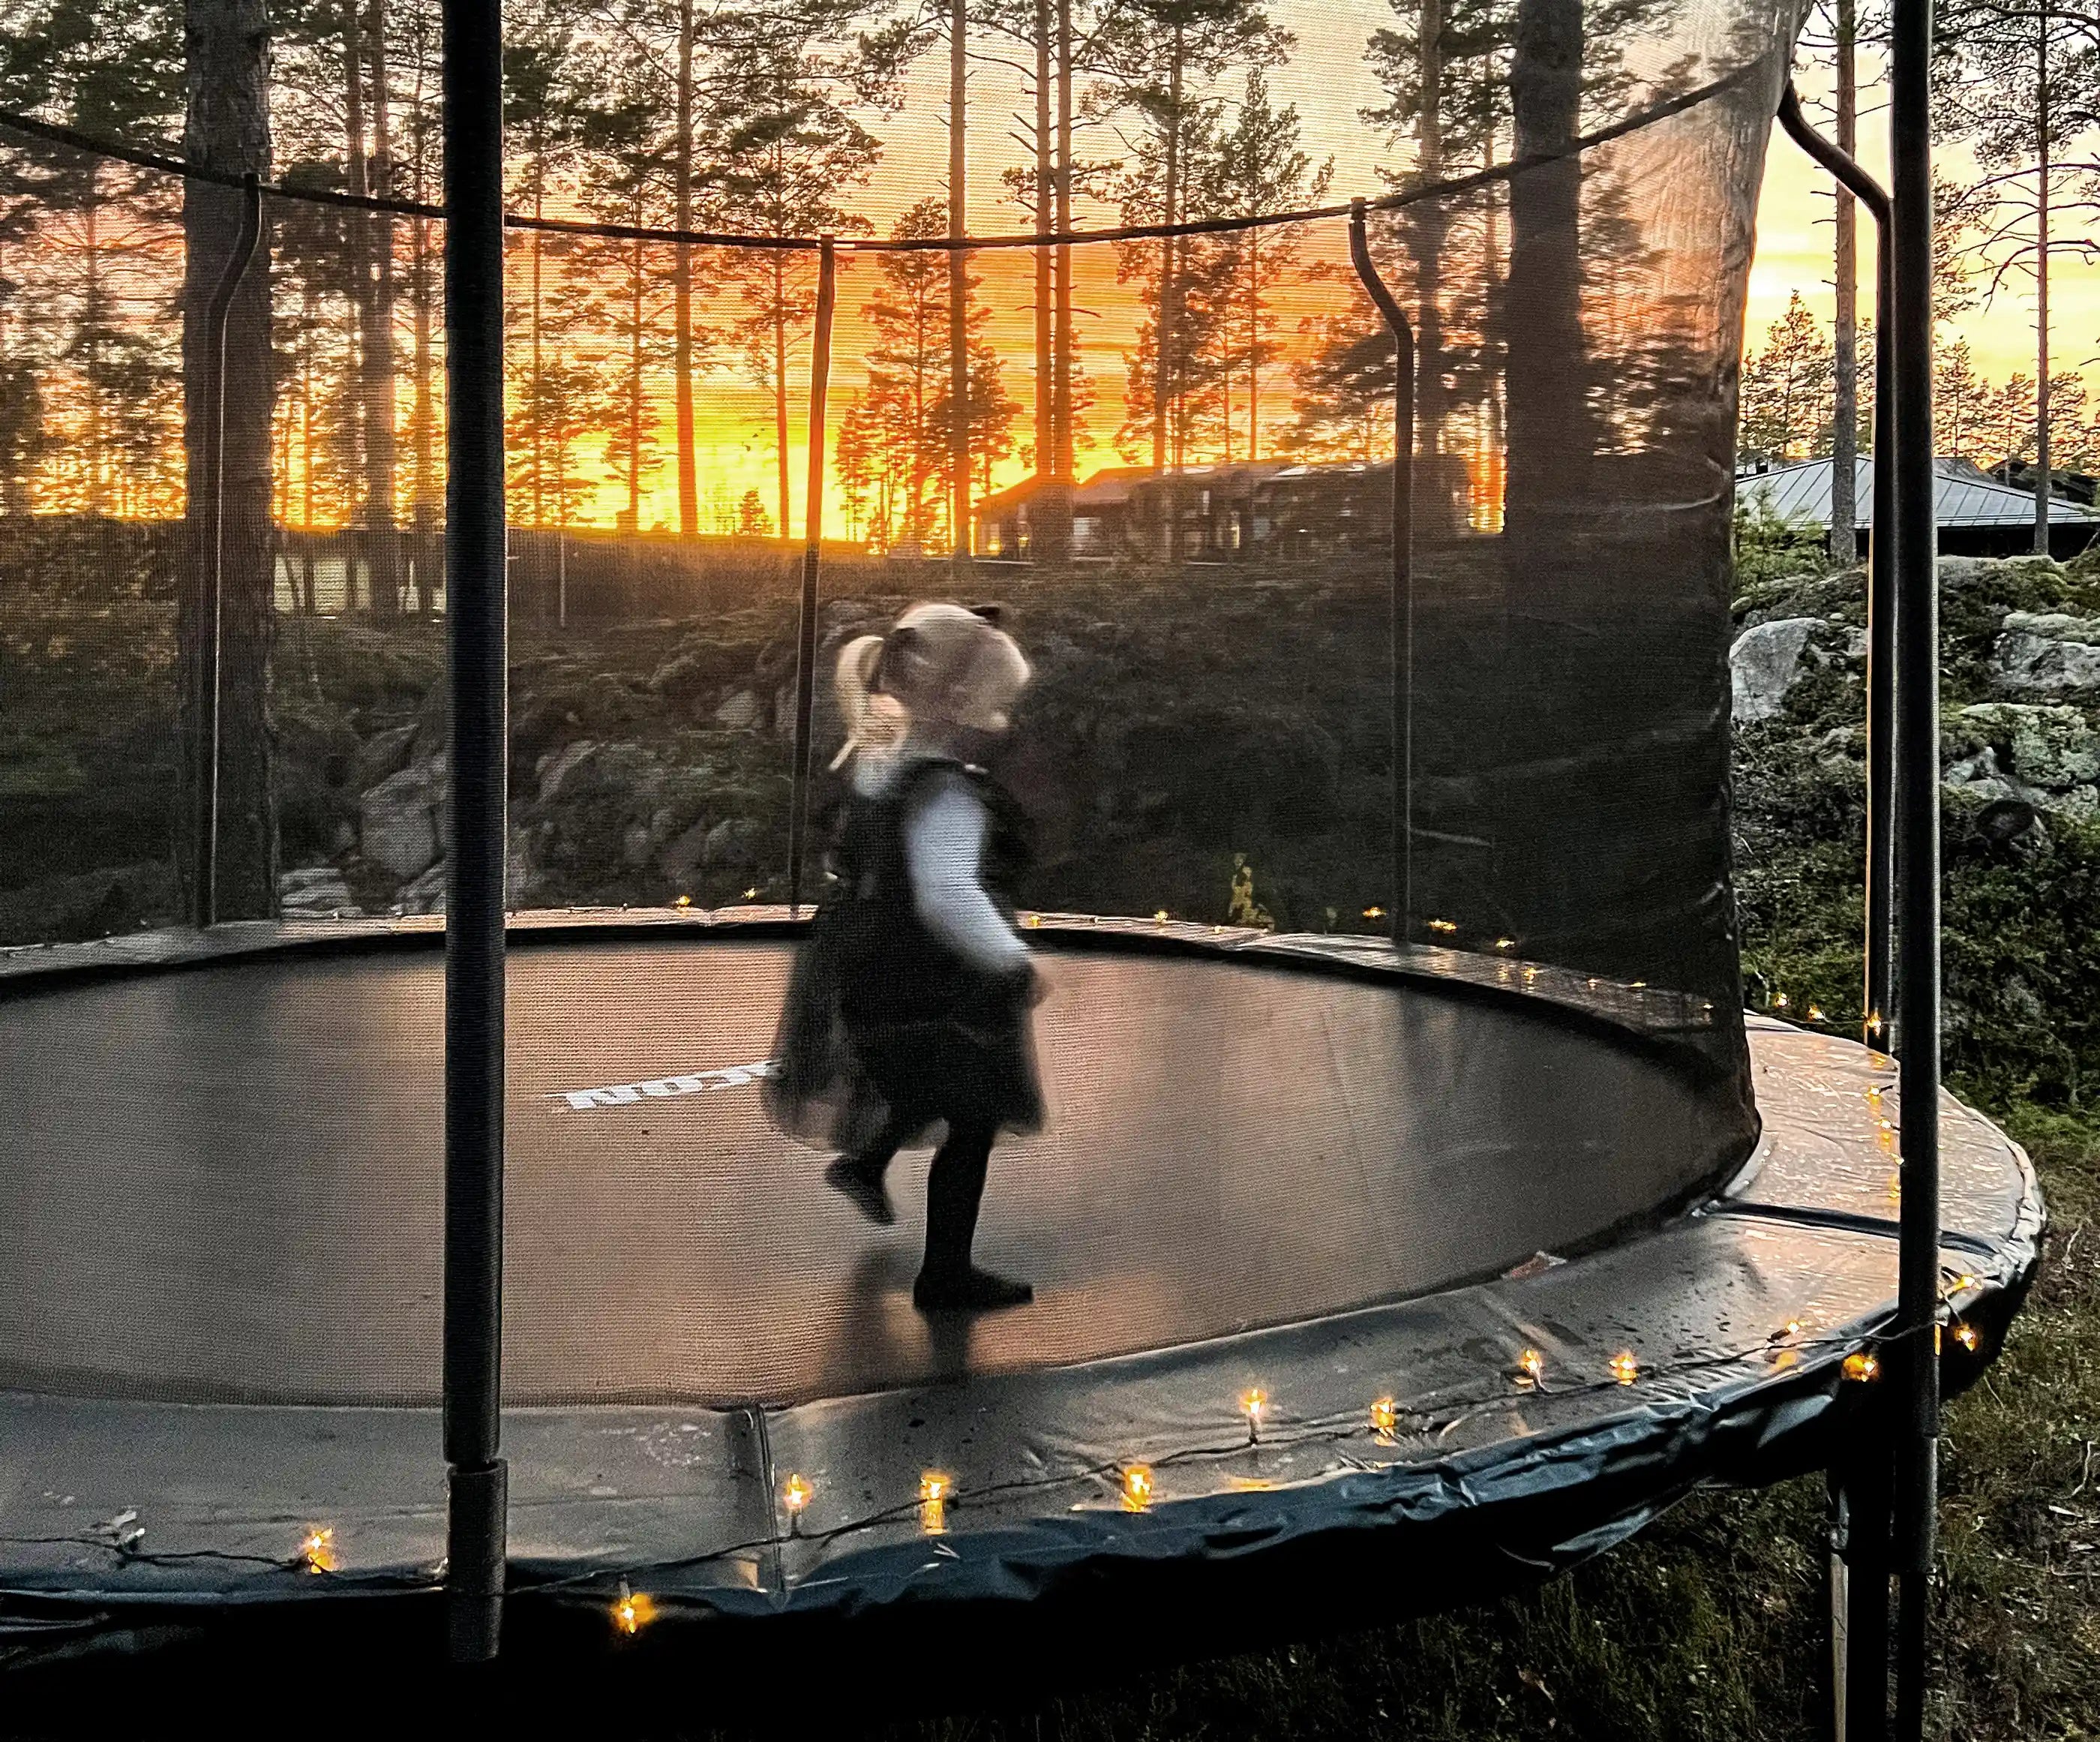 A little girl in Christmas clothing on an ACON round trampoline with enclosure.